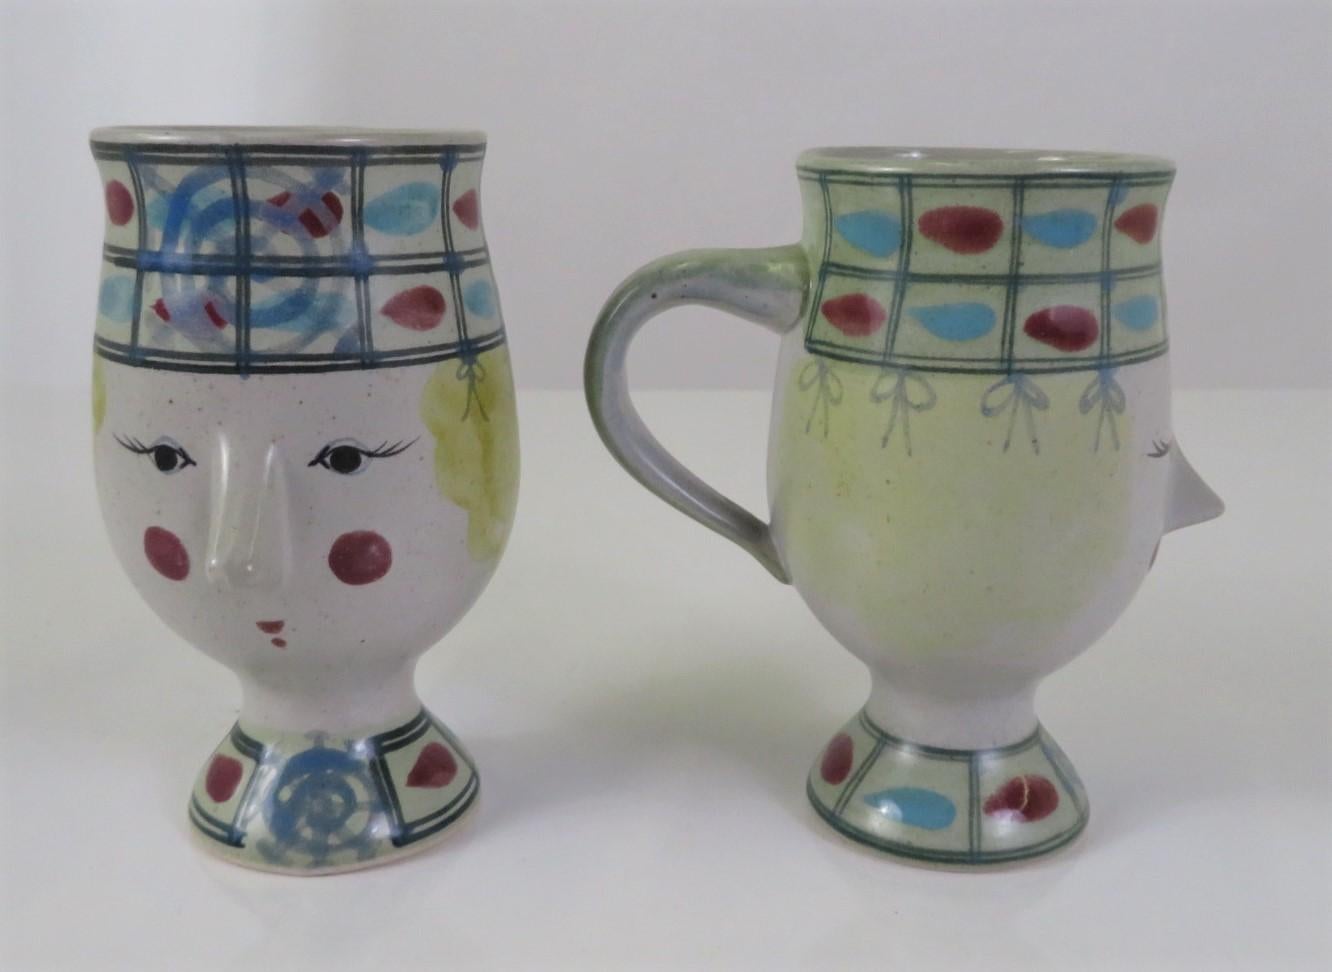 In the decorative style of Bjorn Wiinblad, here are five handled mugs for coffee, expresso, hot chocolate or any beverage with the stylized heads and faces so associated with Wiinblad. No signature on bottom but have seen the same mugs with the Fitz